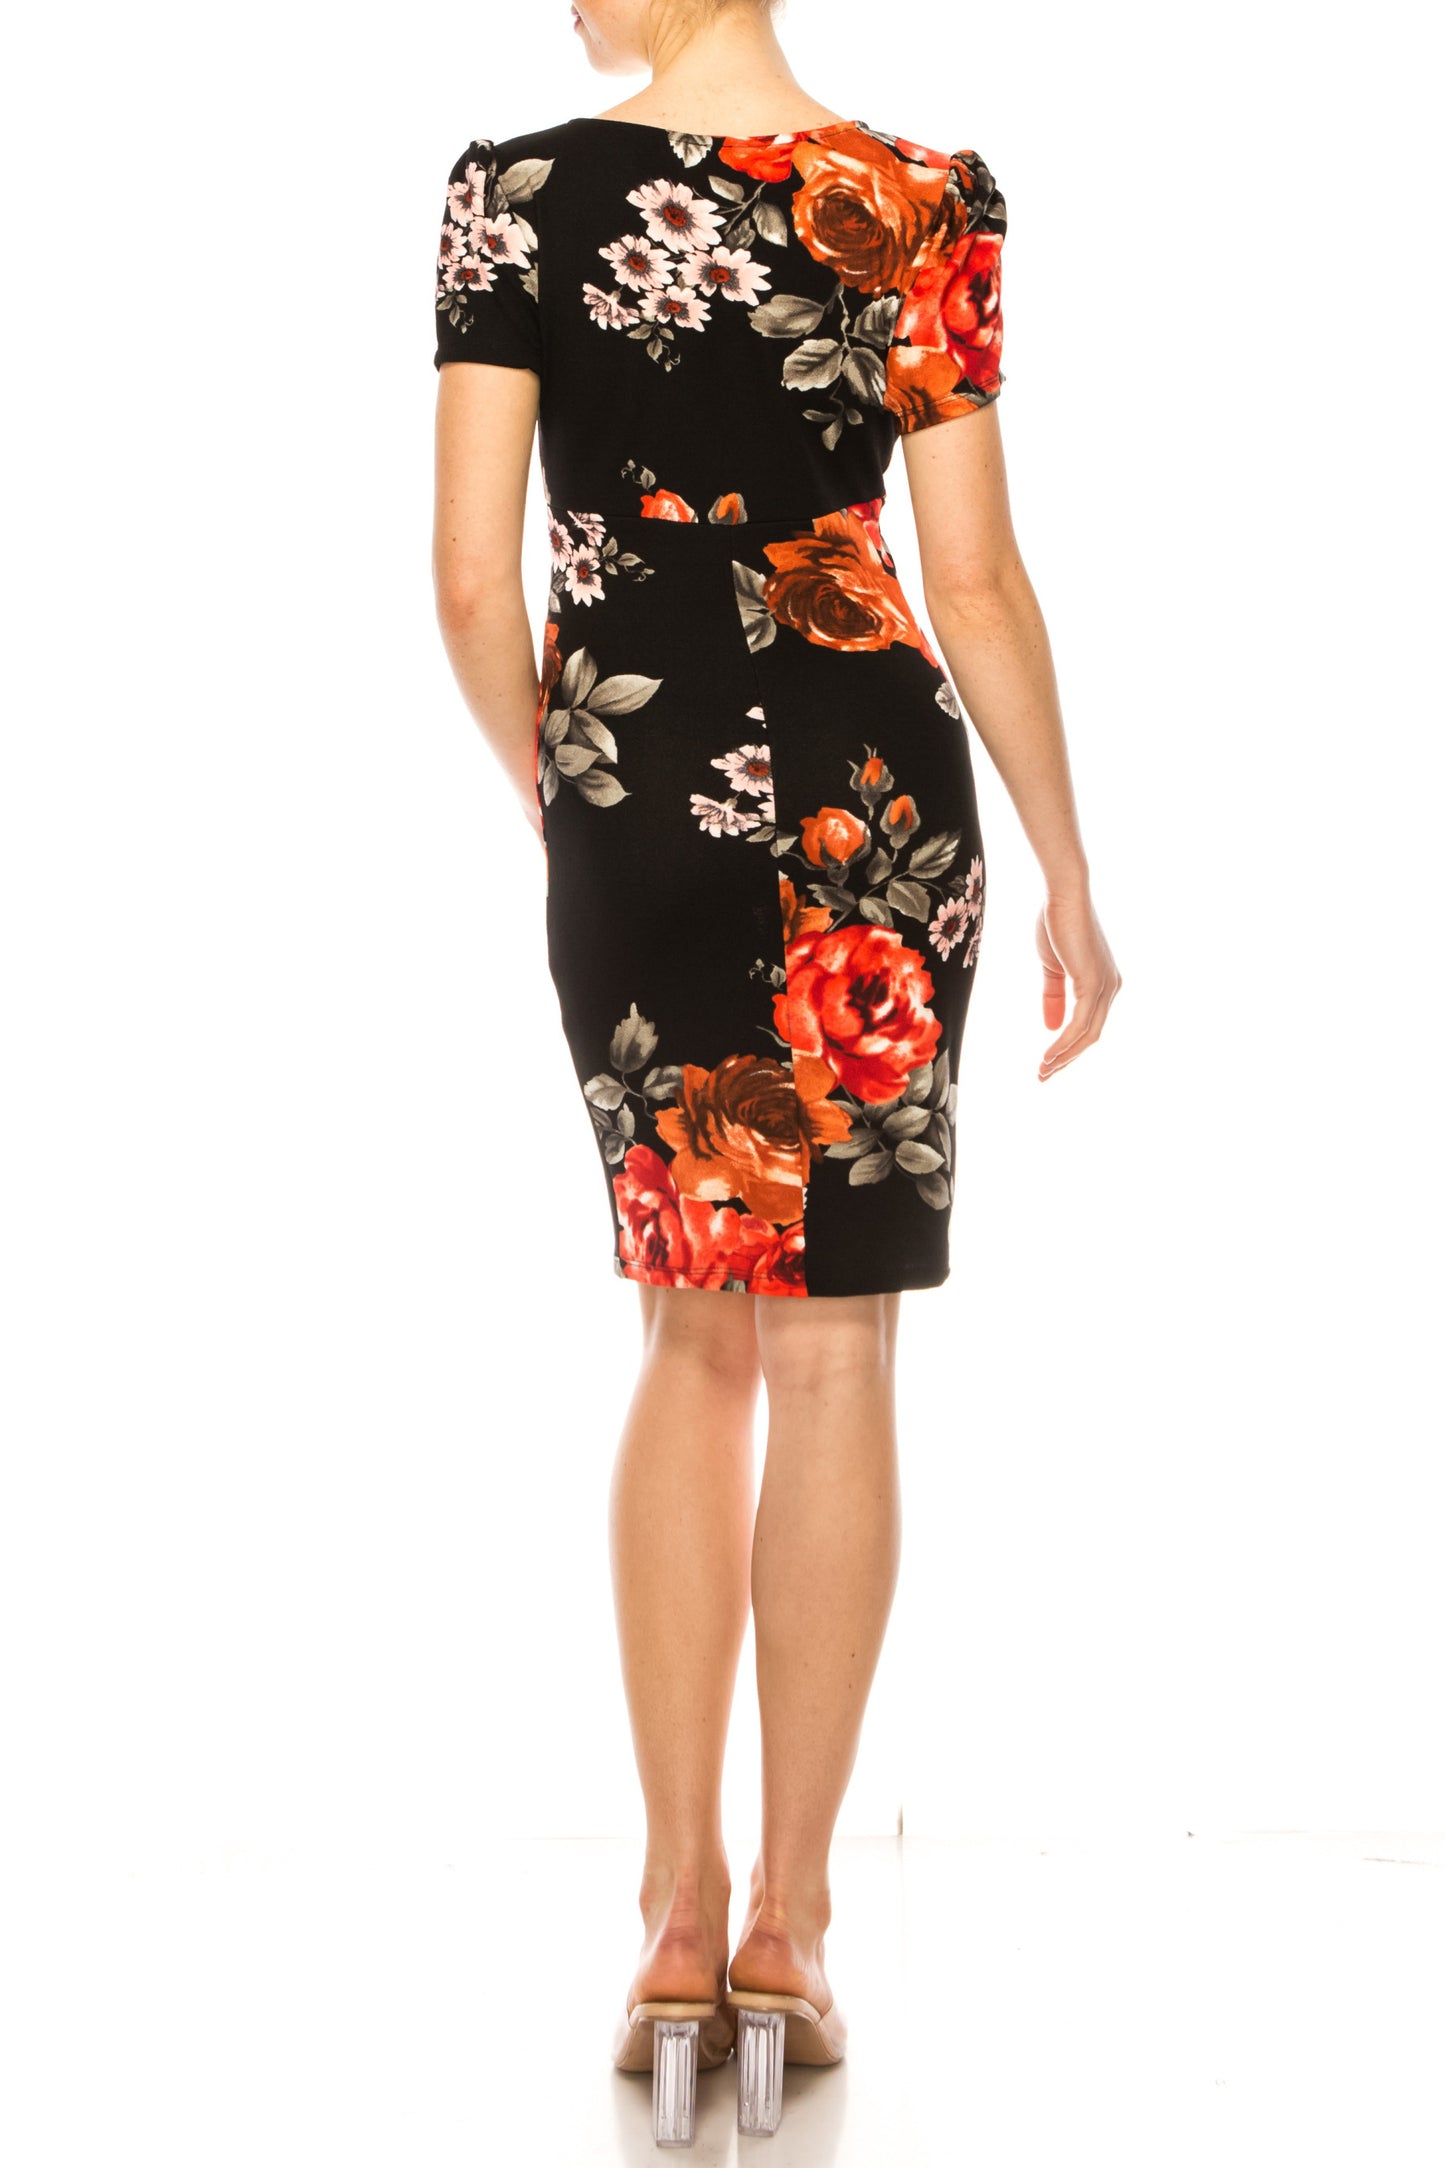 Women's Floral Sheath Dress with Deep V-Neckline and Puff Sleeves